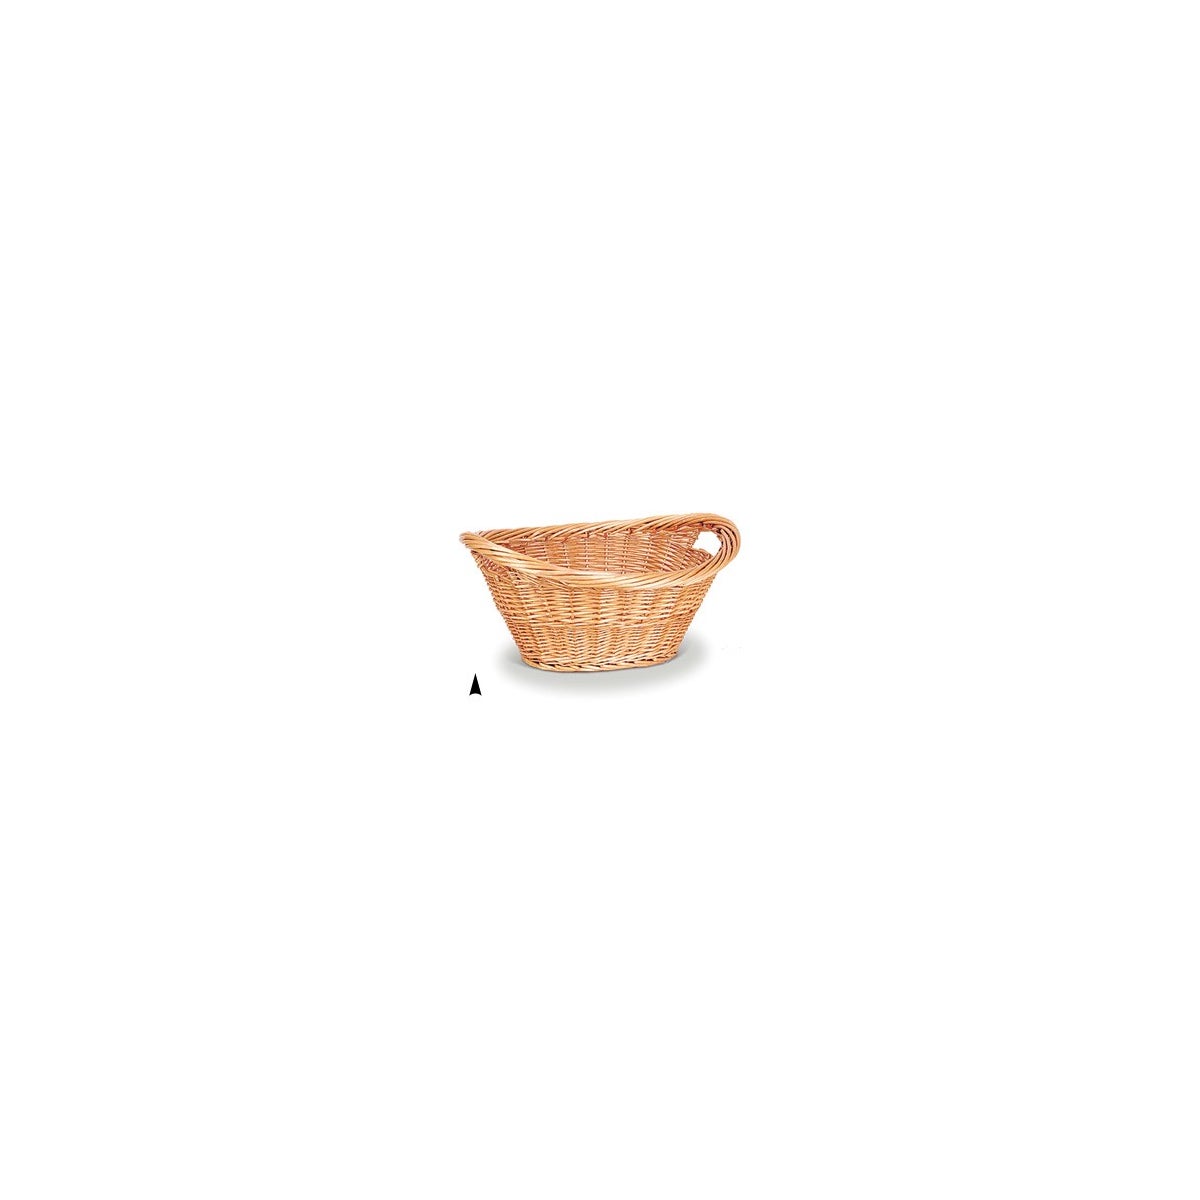 885/24B OVAL STAINED WILLOW LAUNDRY BASKET CS. PK.: 20